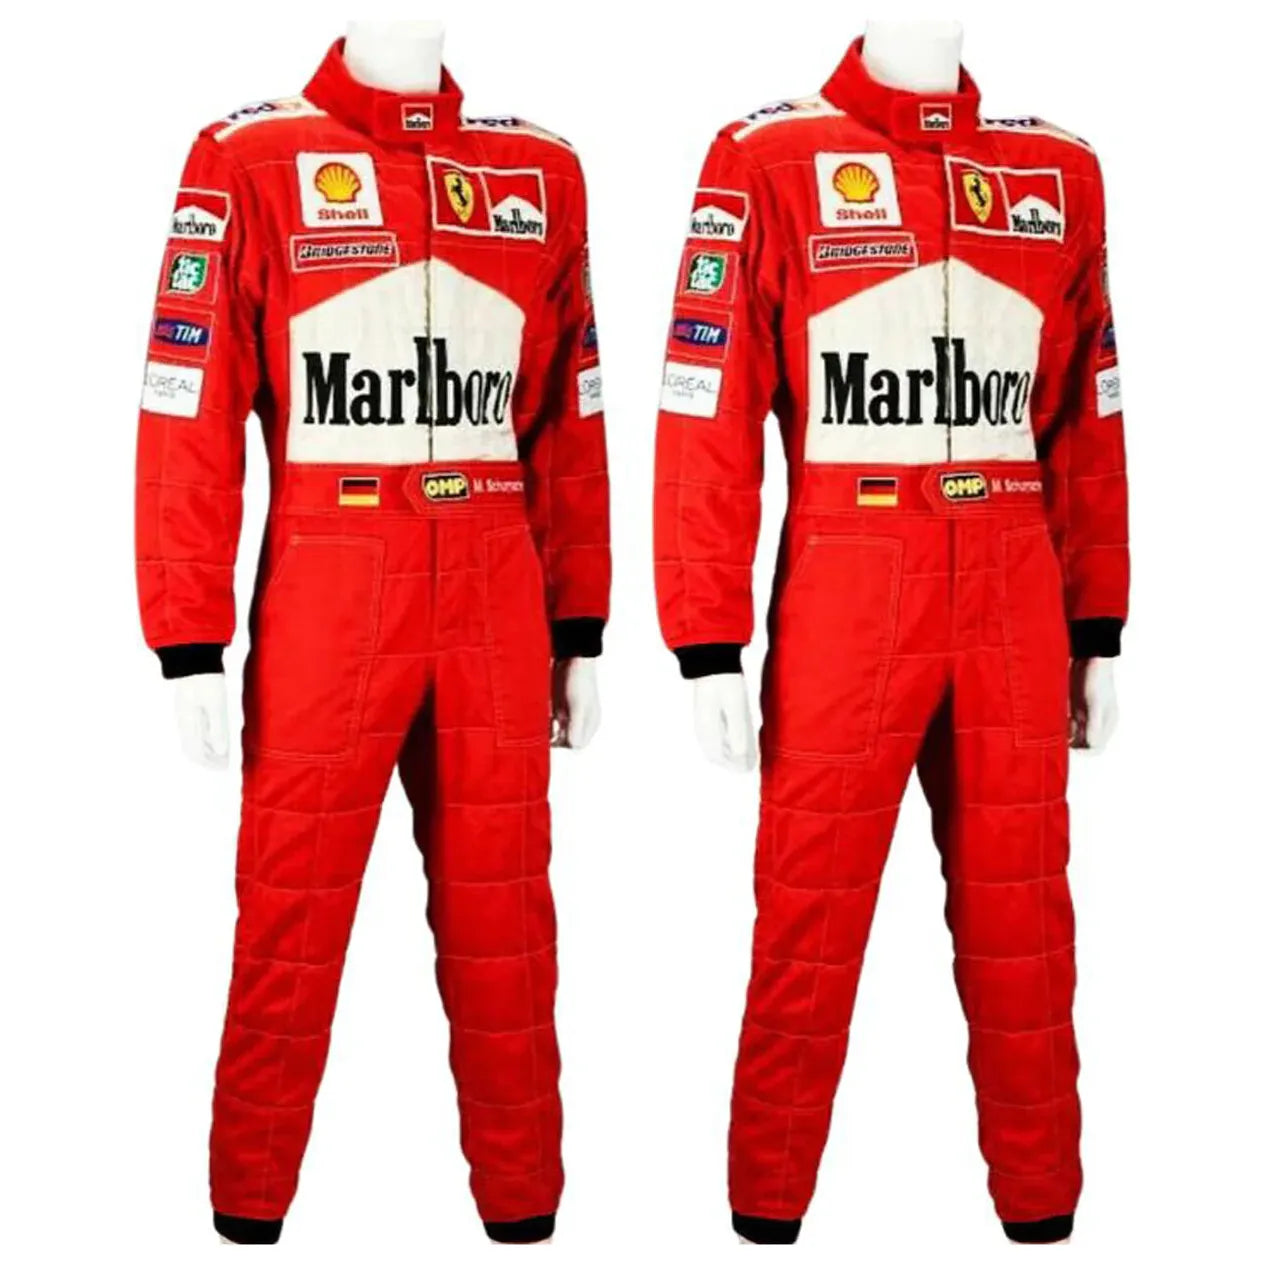 Go kart racing Sublimation Protective clothing Racing gear Suit N-061